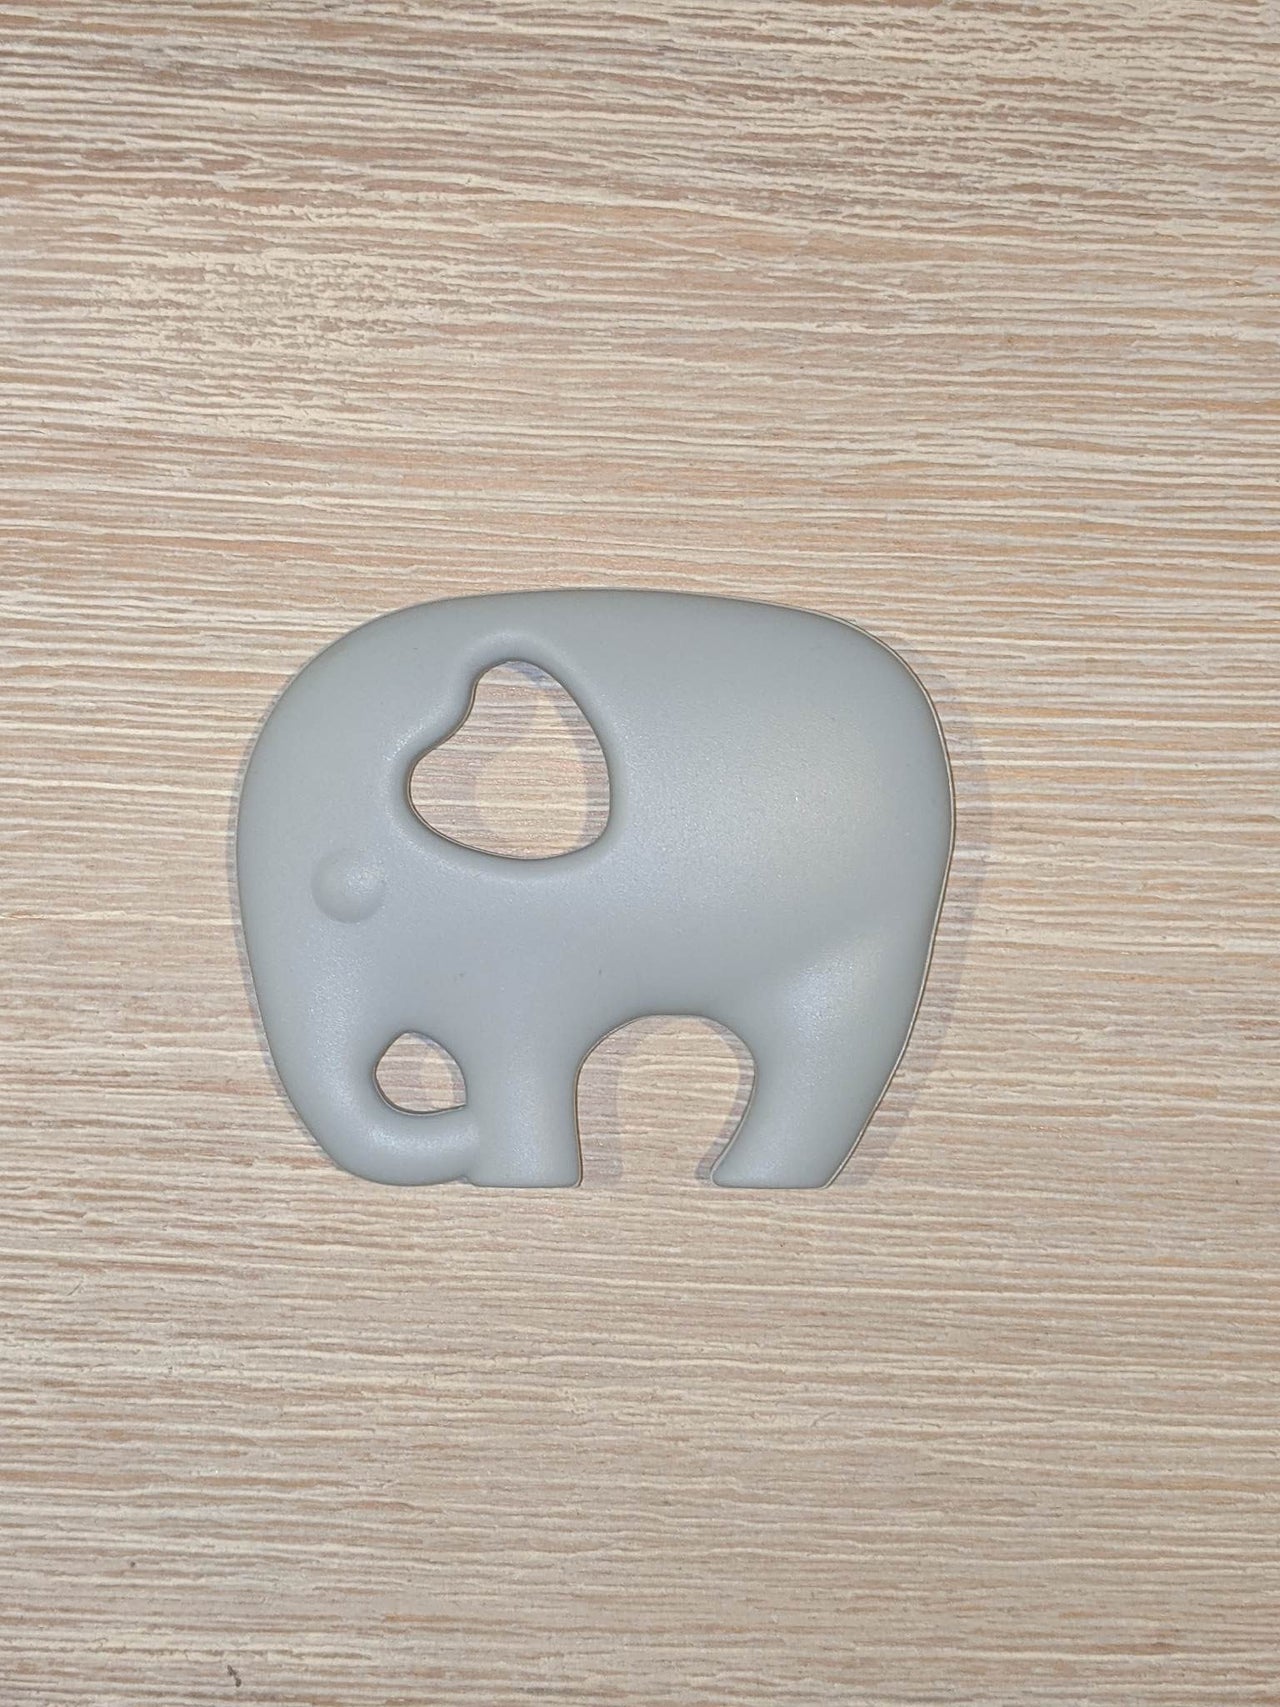 Silicone Elephant Baby Teether Baby Teether from Sprout Maternity maternity online store brisbane sydney perth australia